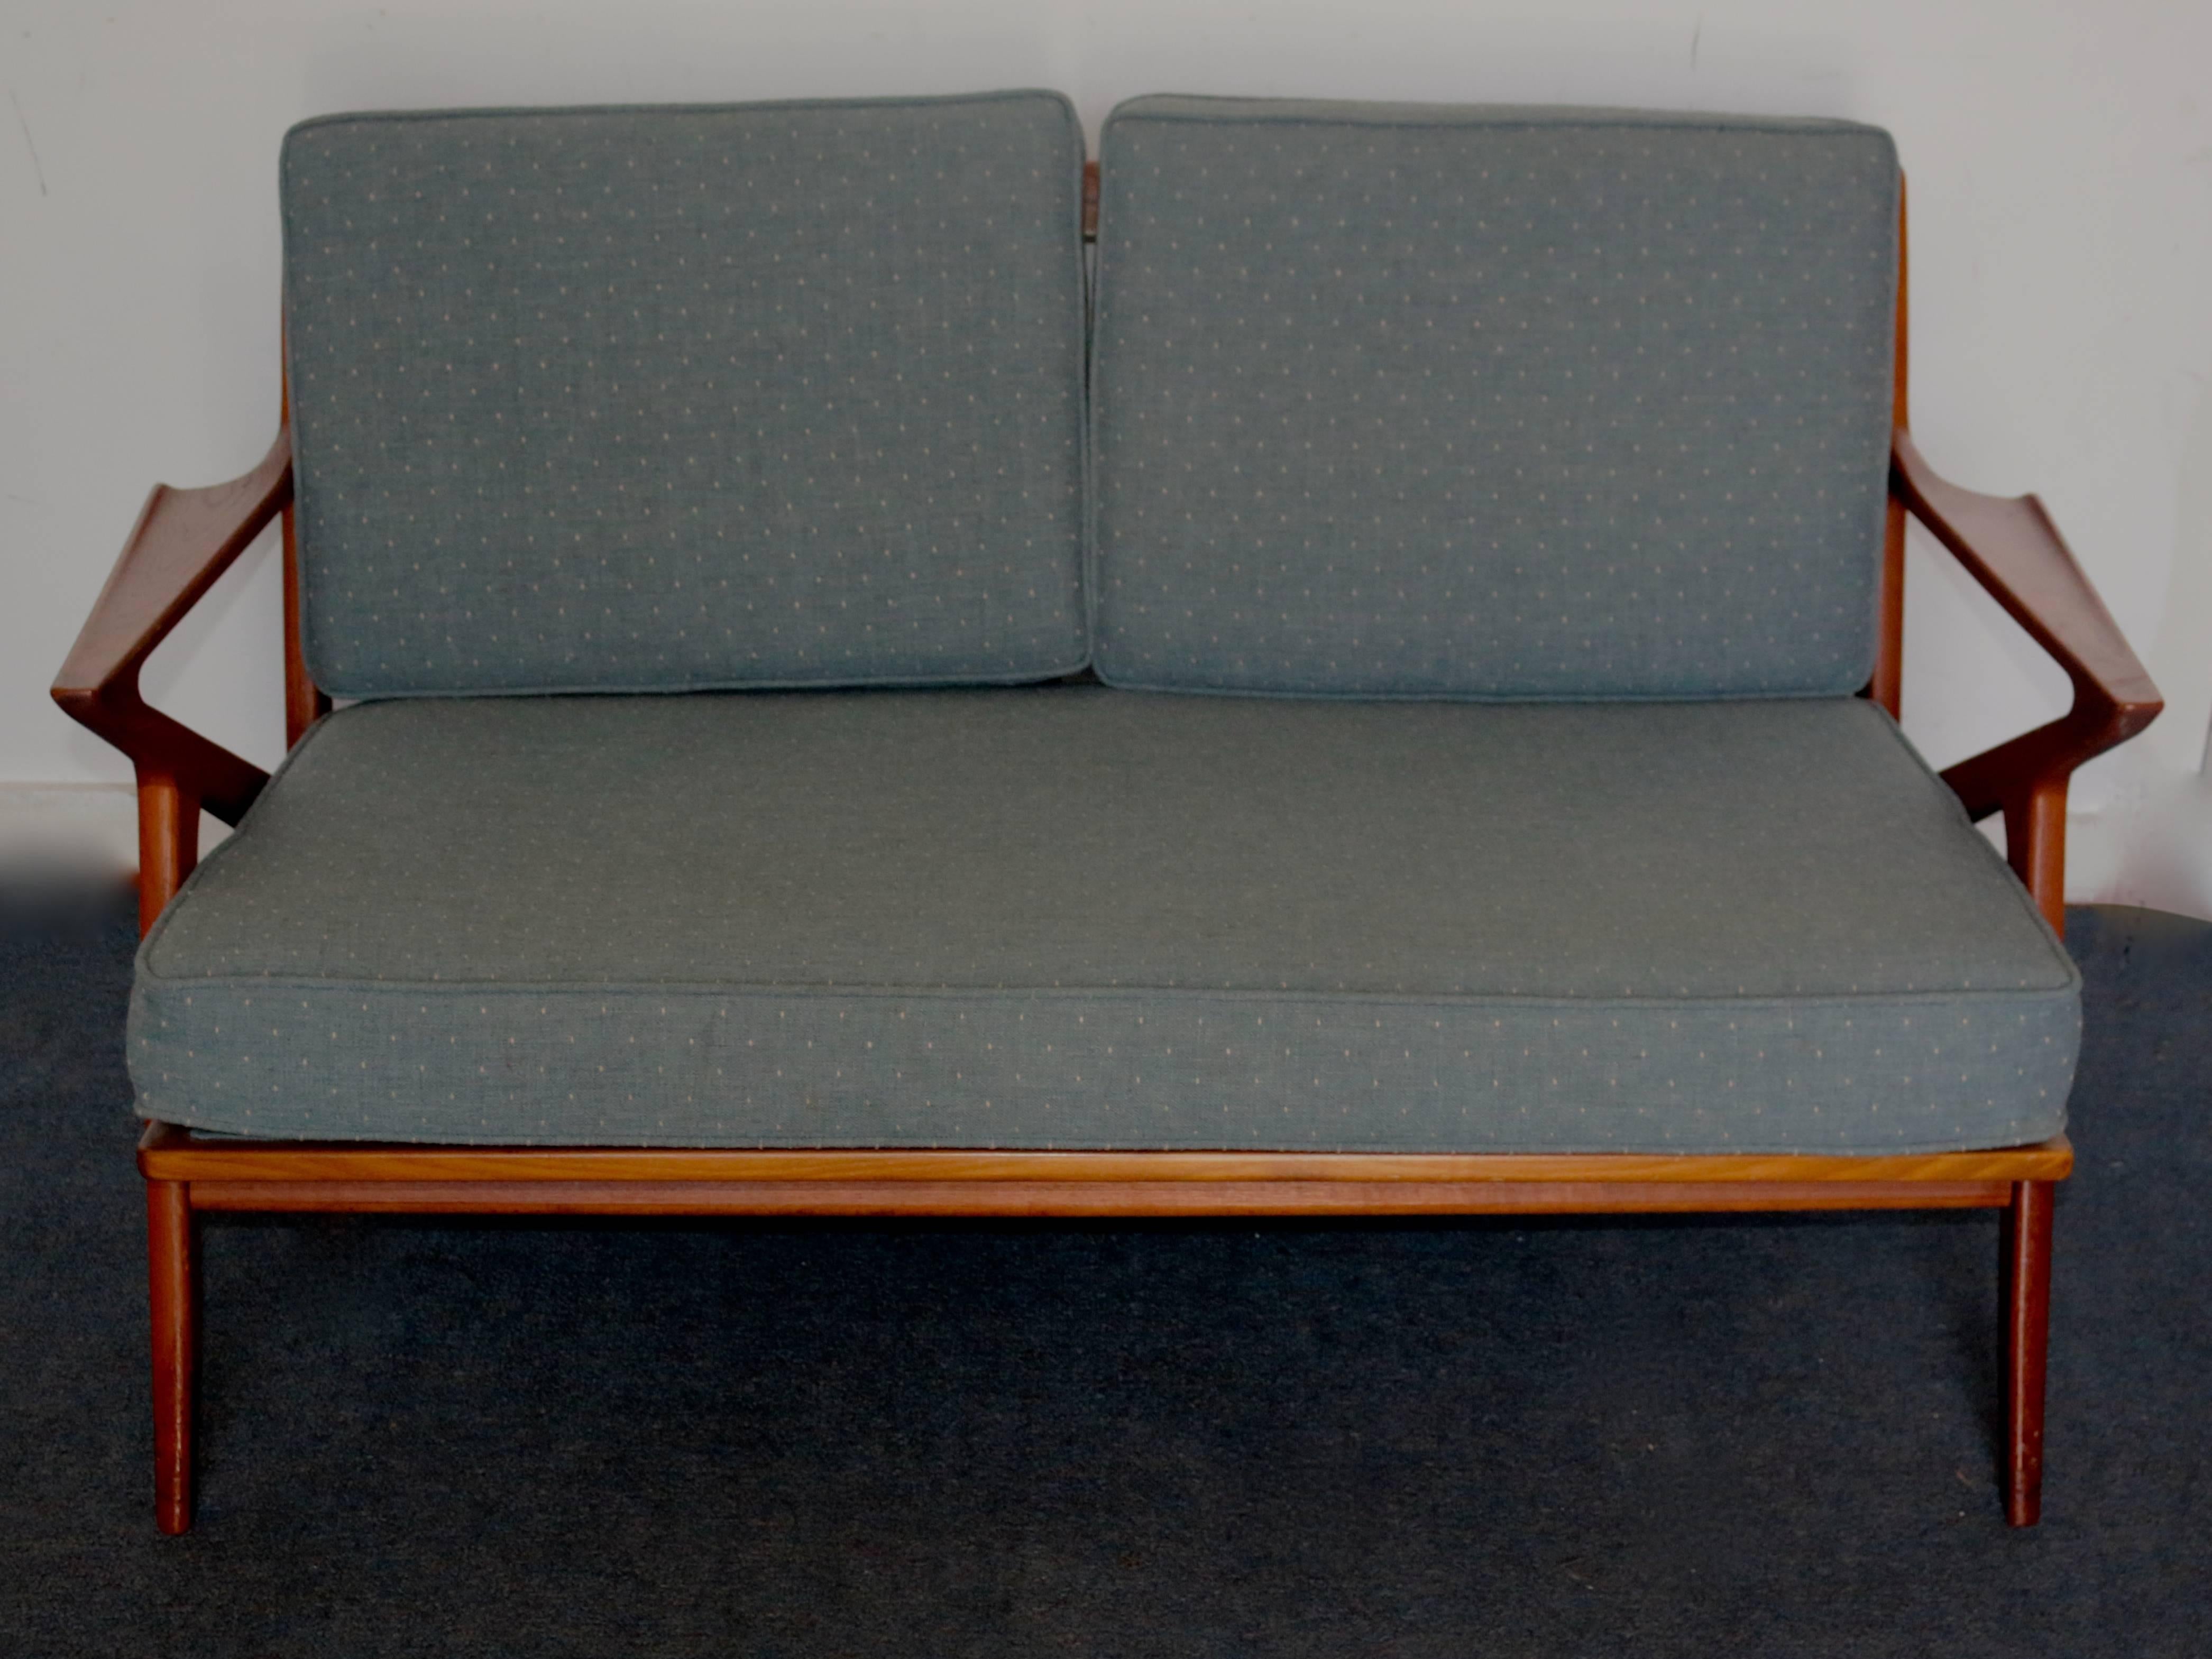 Danish Mid-Century Modern teak 'Z' settee by Poul Jensen with original Fabric in excellent used condition.
 